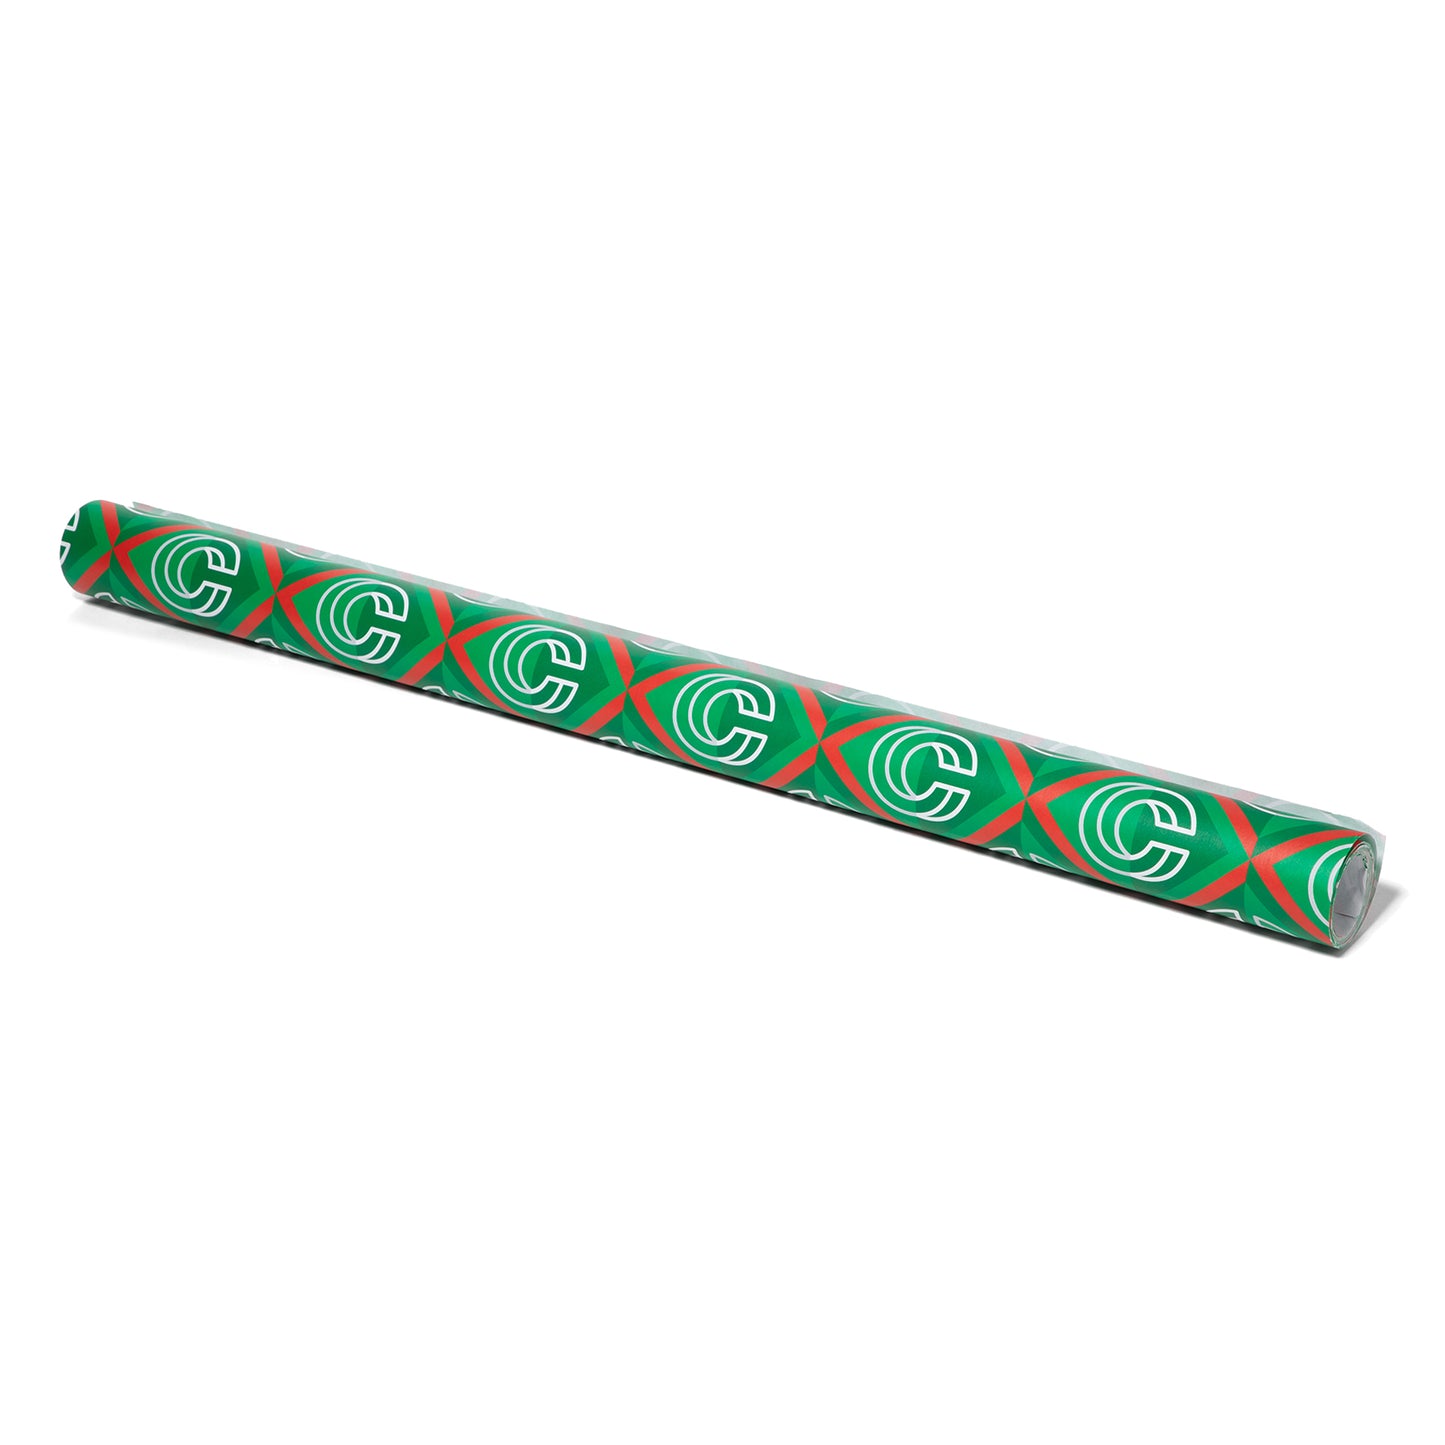 Concepts Almas Holiday Gift Wrap (Green/Red/White)